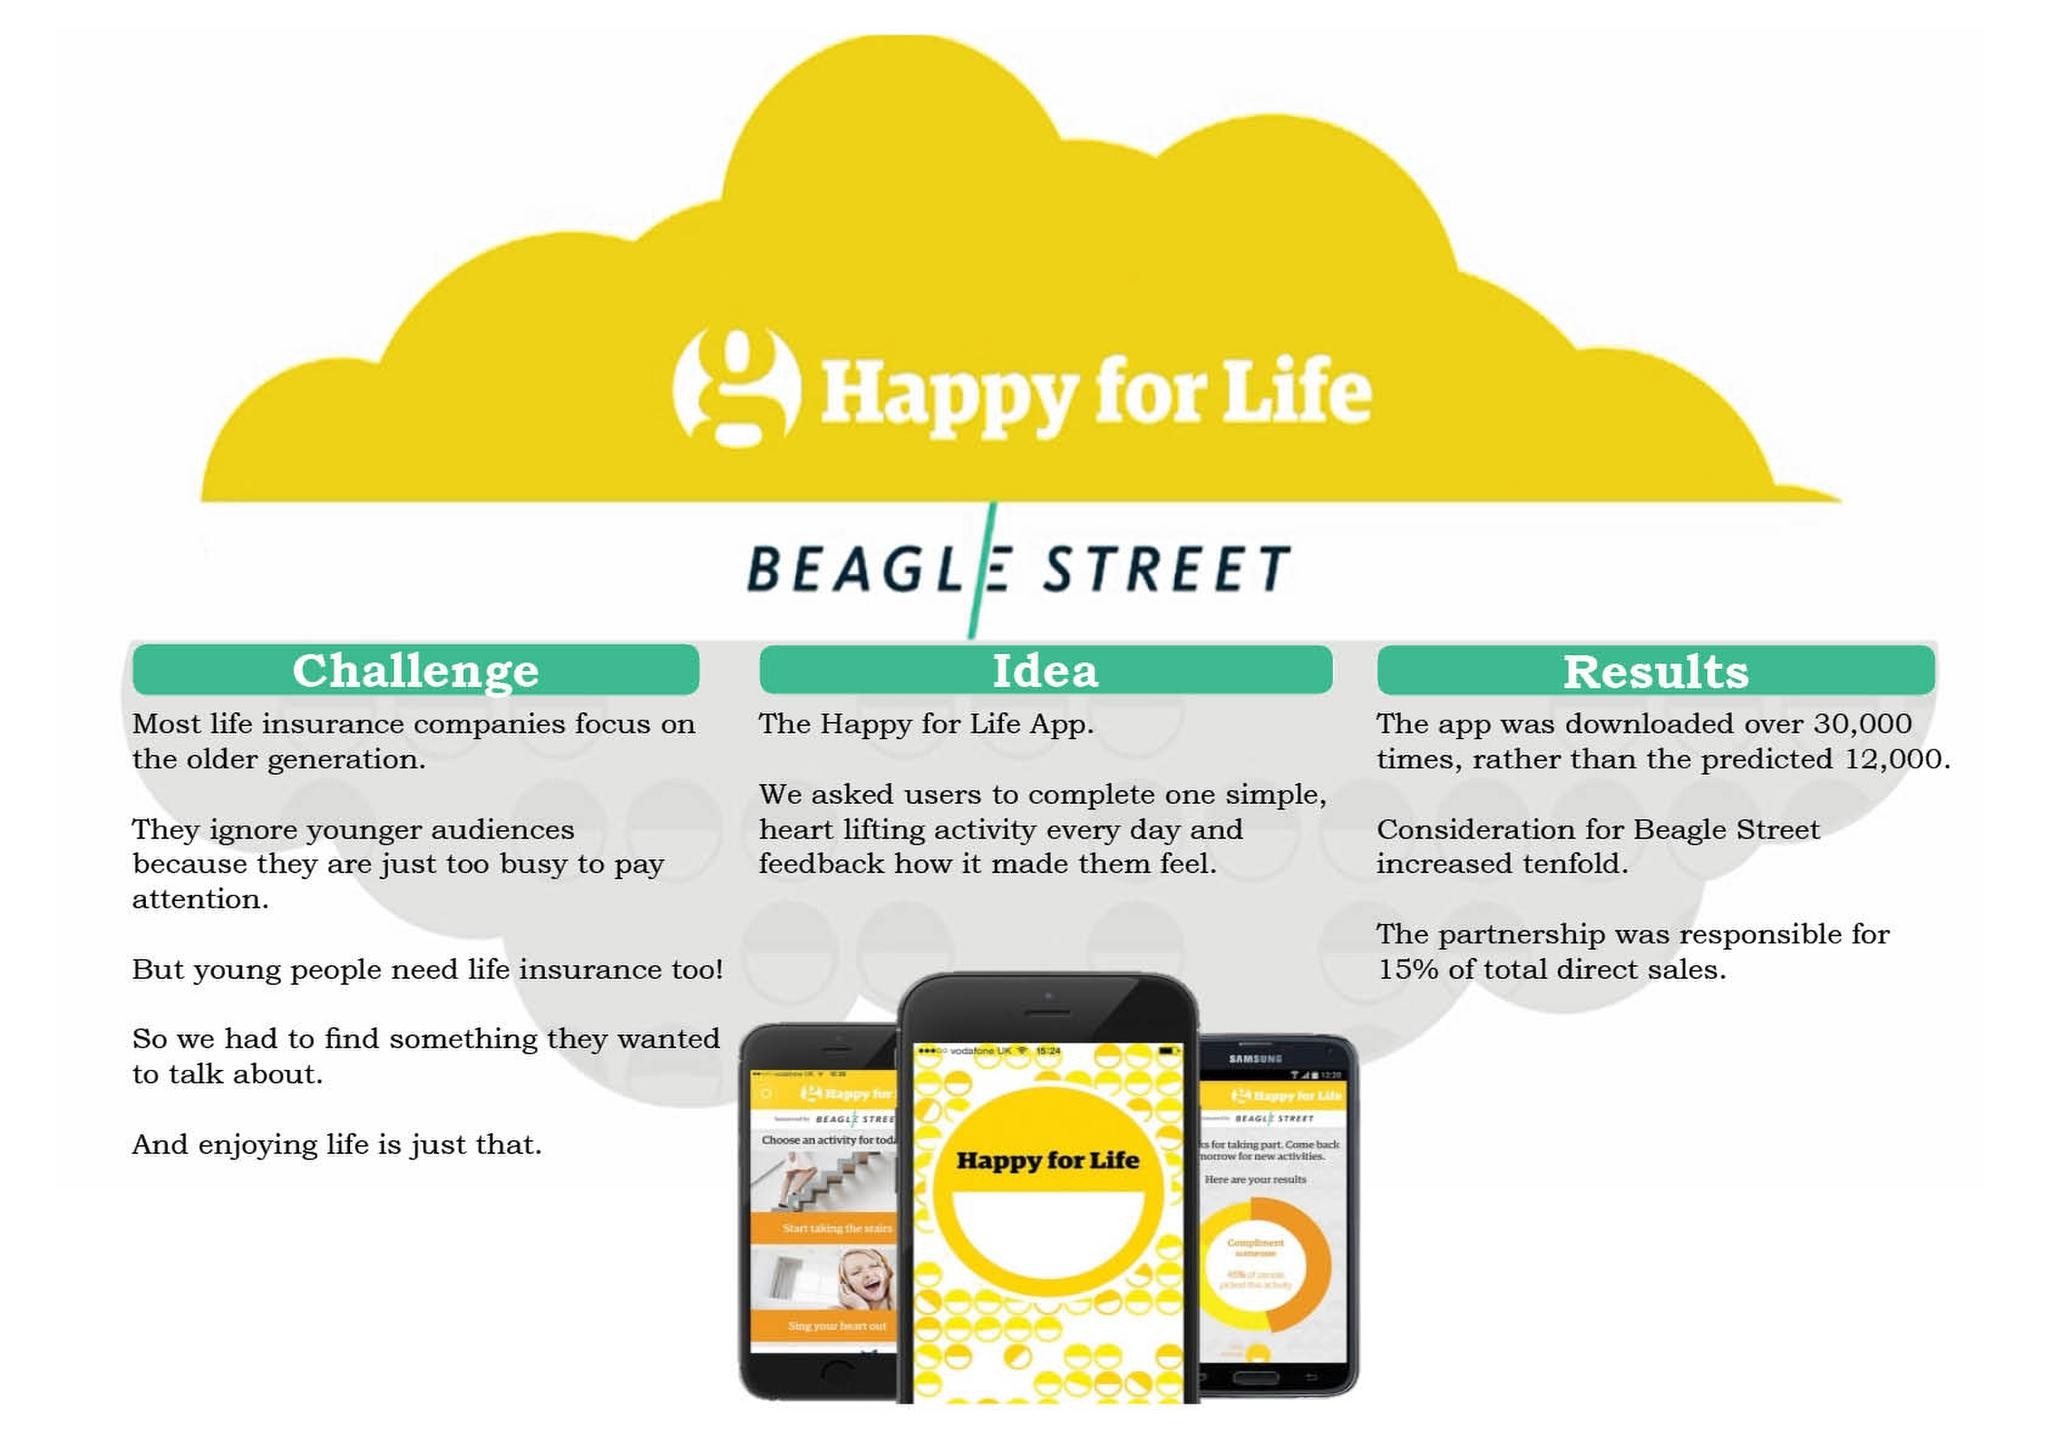 THE HAPPY FOR LIFE APP